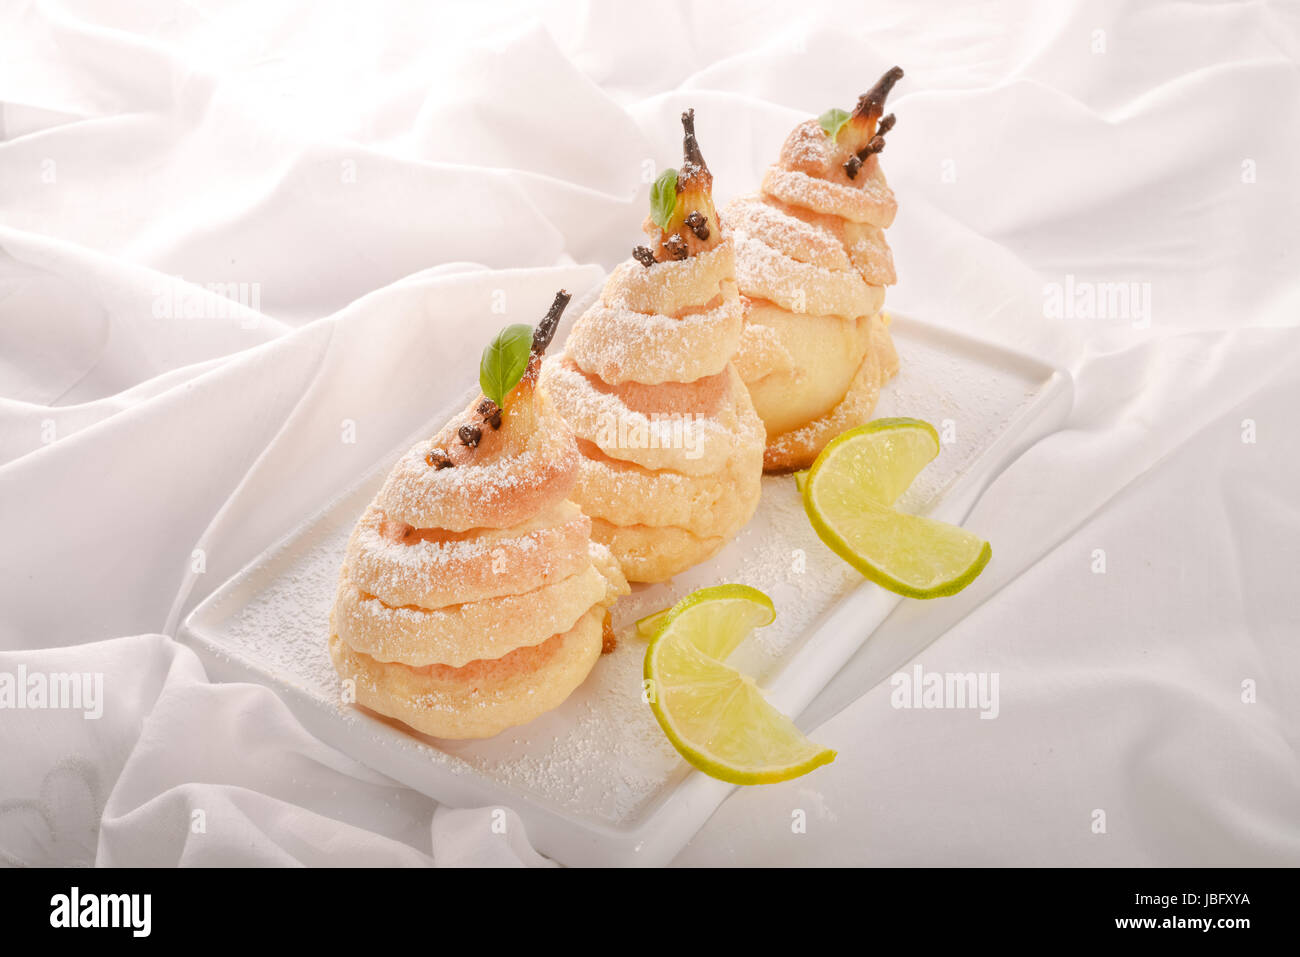 PEAR in pastry Stock Photo